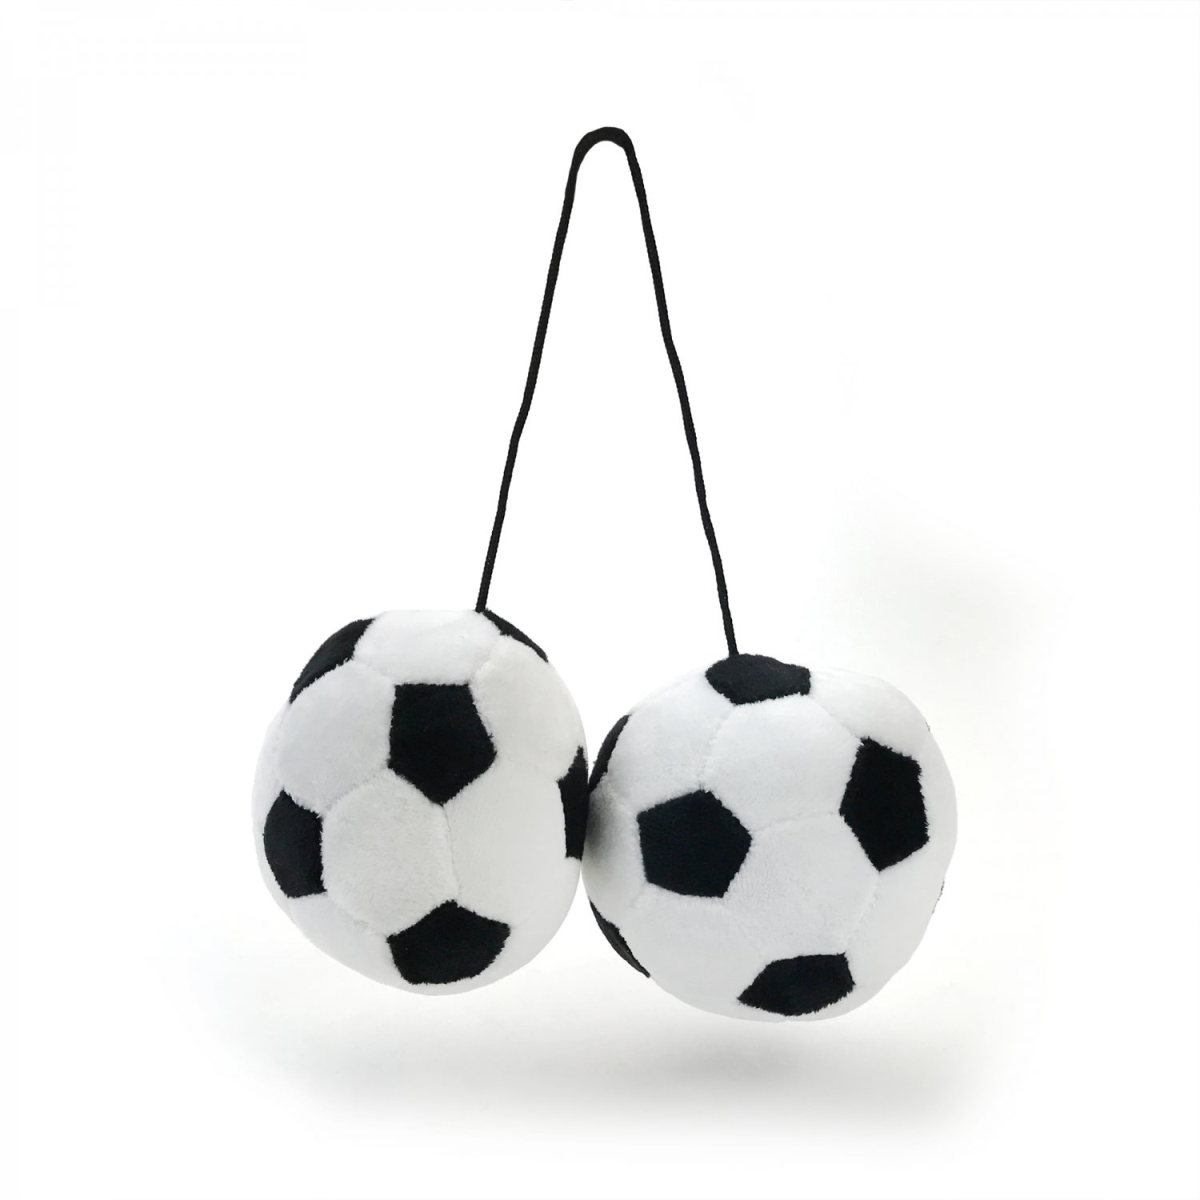 Fuzzy Hanging Rearview Mirror Soccer Balls - White & Black, Pack of 2 -  Go-for-Gold, GO2585749